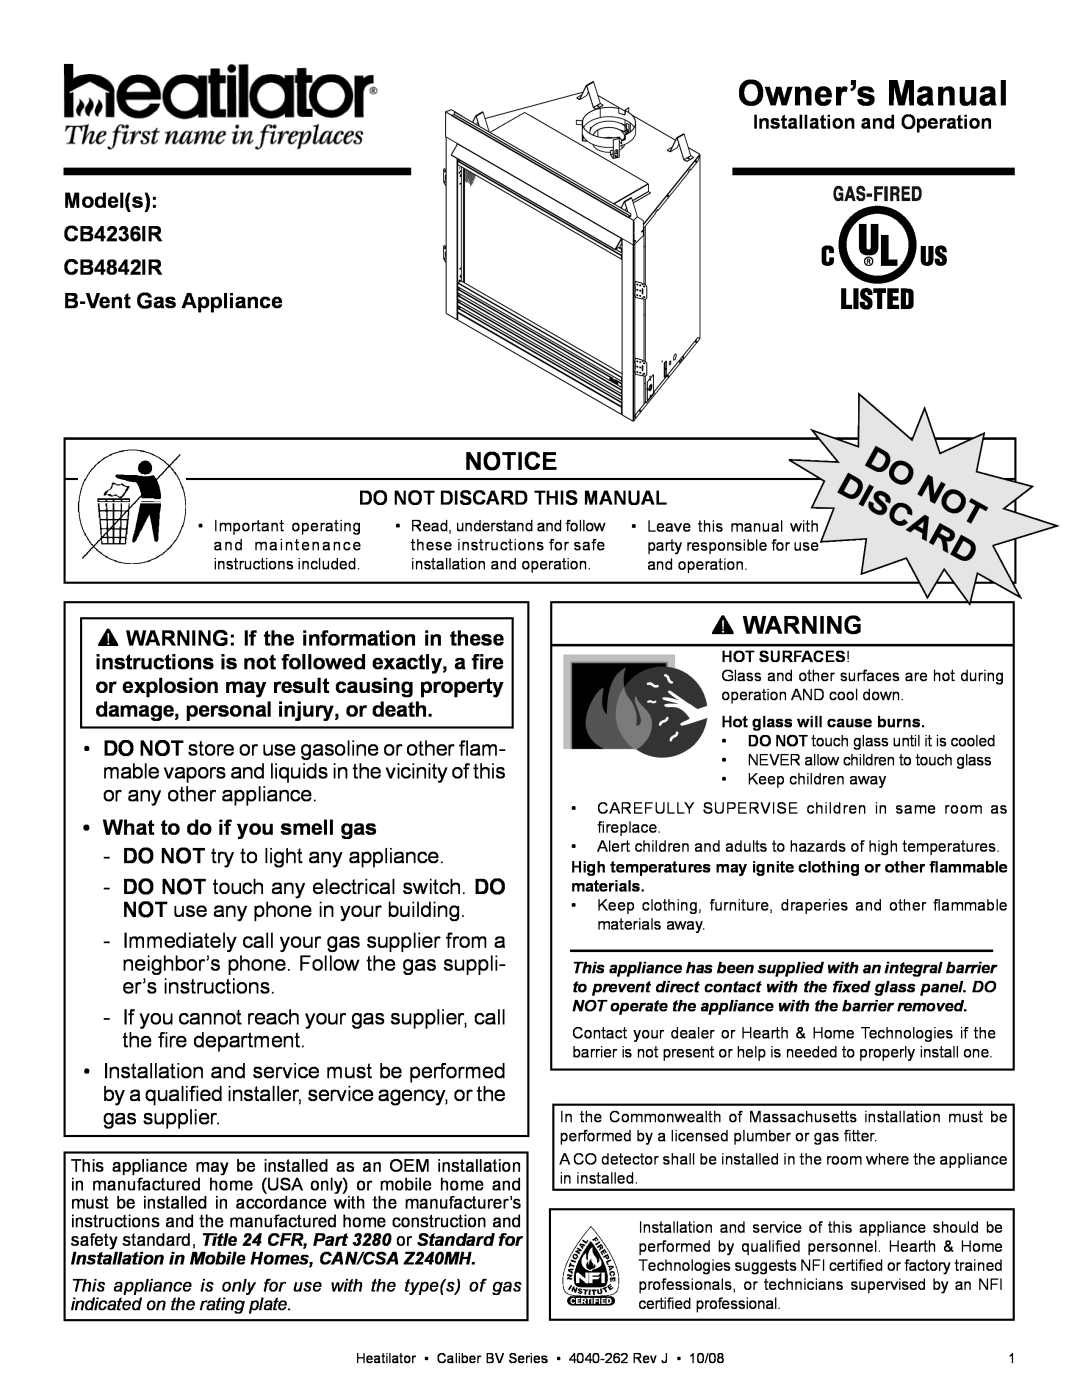 Hearth and Home Technologies owner manual Models CB4236IR CB4842IR B-Vent Gas Appliance, What to do if you smell gas 